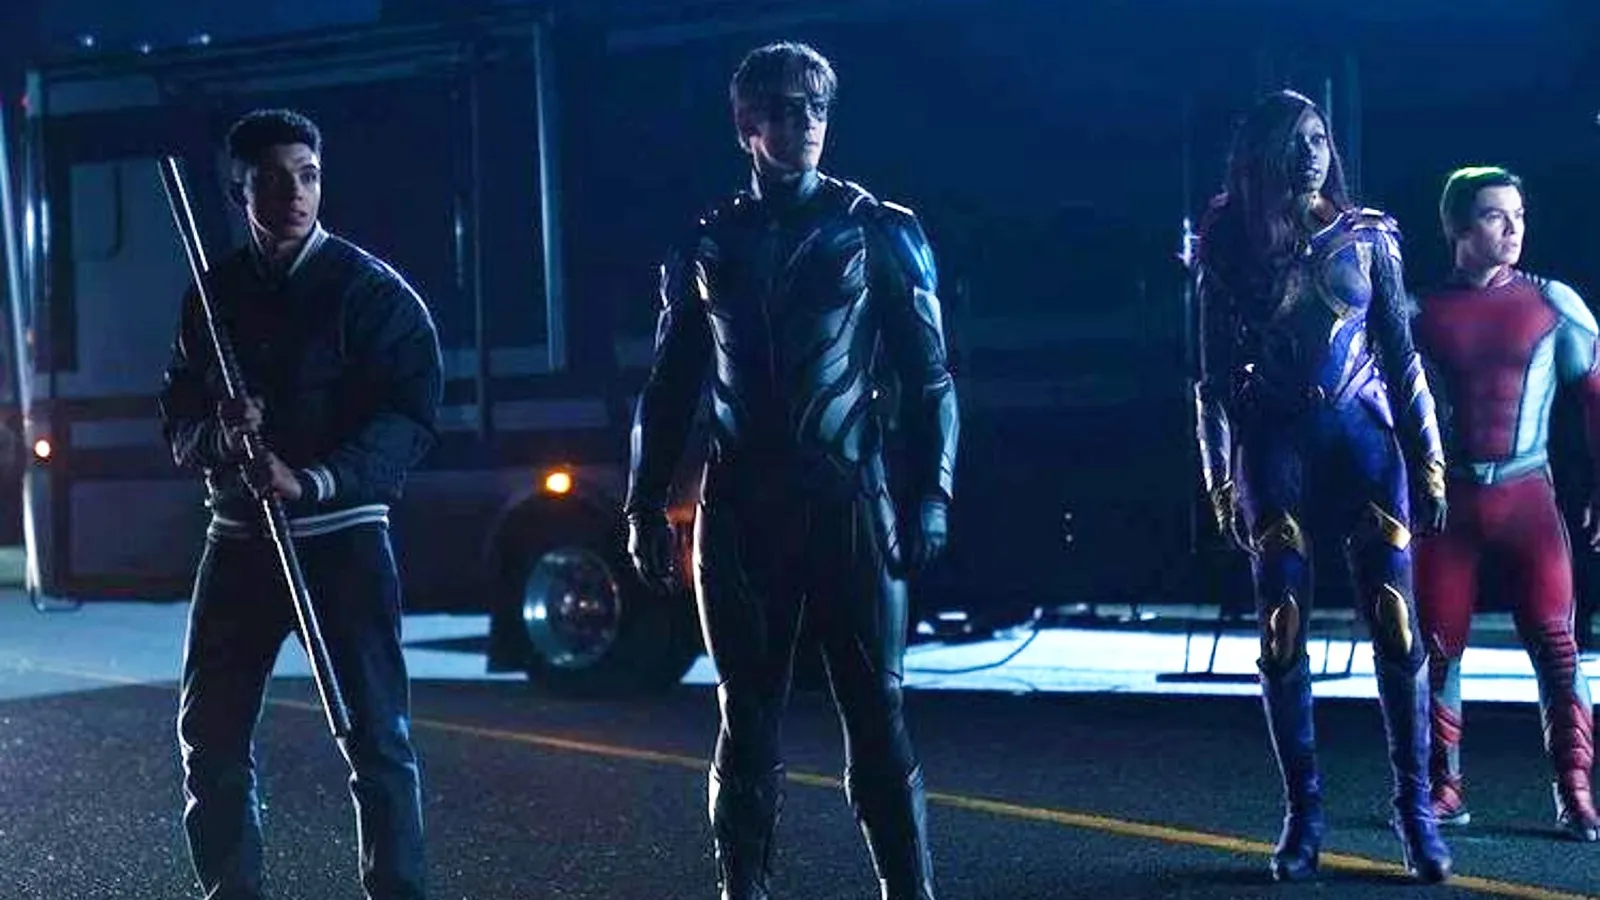 ‘Titans’ season 4 premiere quickly reveals whether or not DC fans want to see more